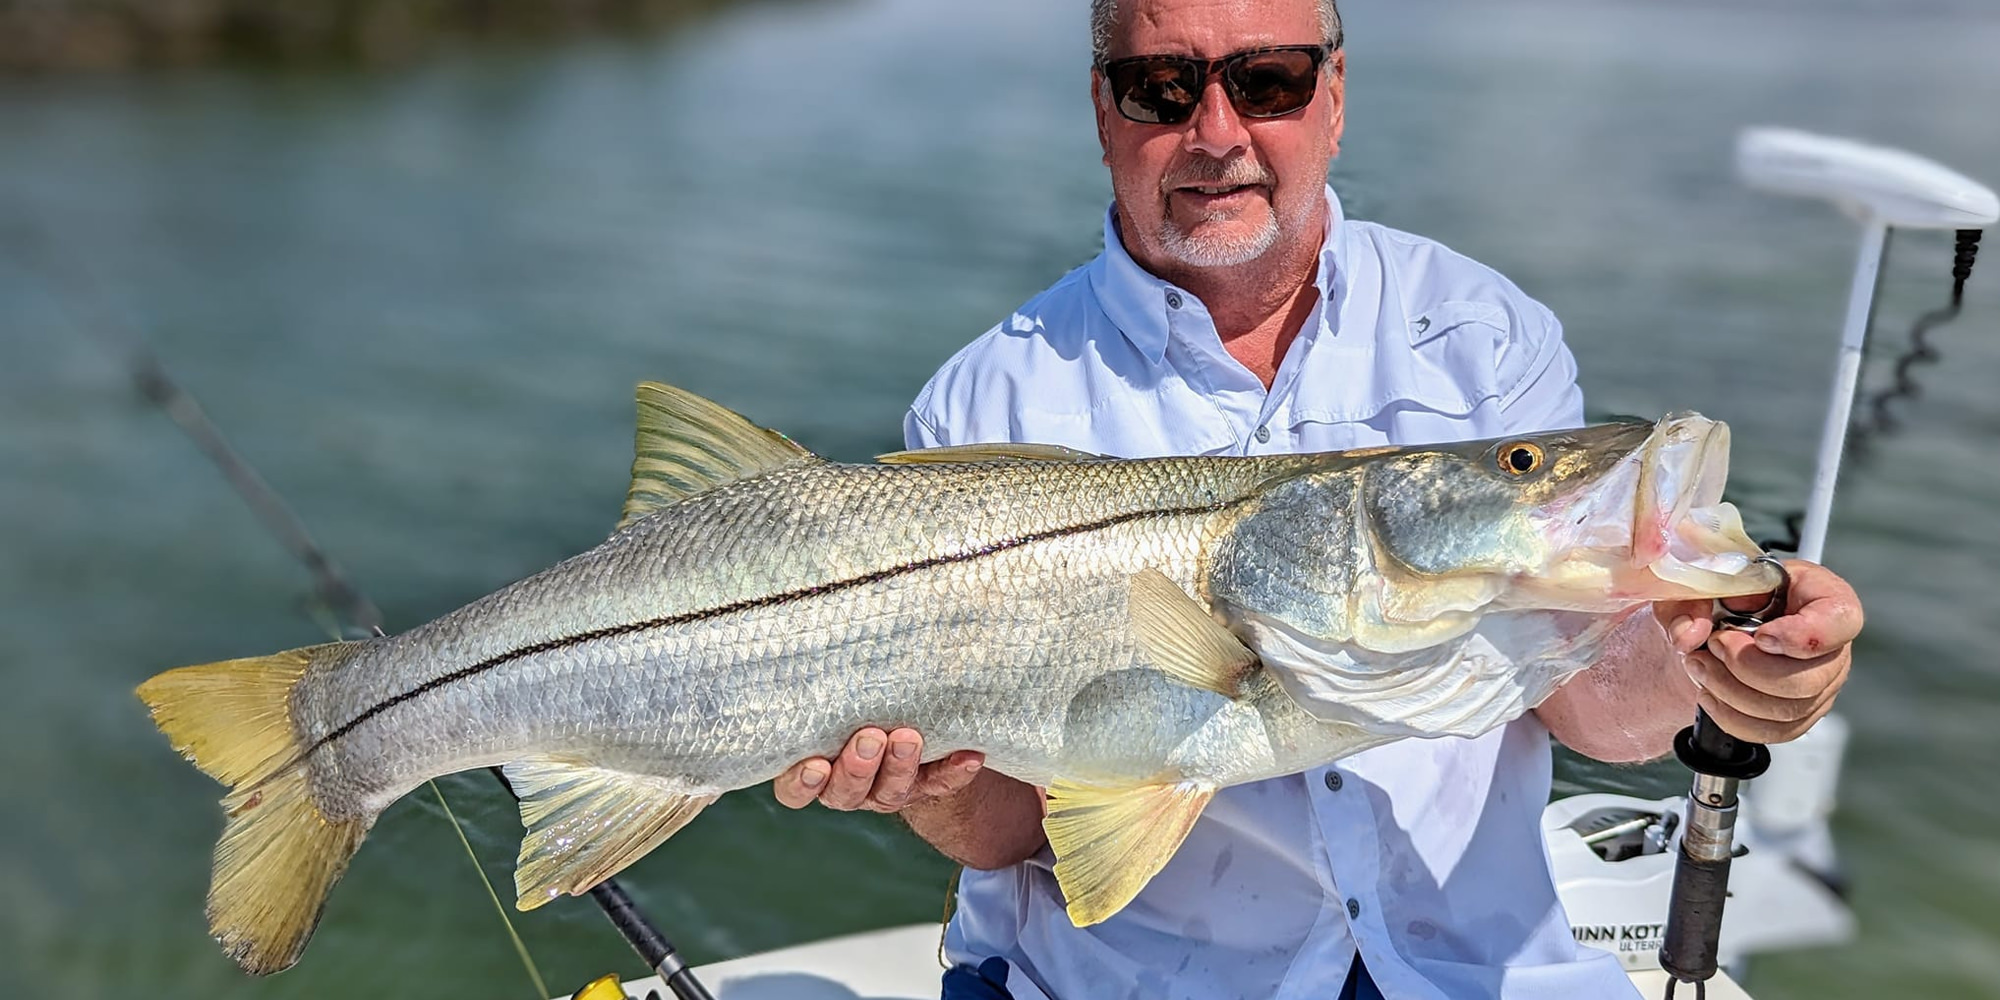 Florida Inshore Xtream Fishing Guide customer holding up a snook caught off Boca Grande on a Nearshore Fishing Charter in the waters of southern Florida.